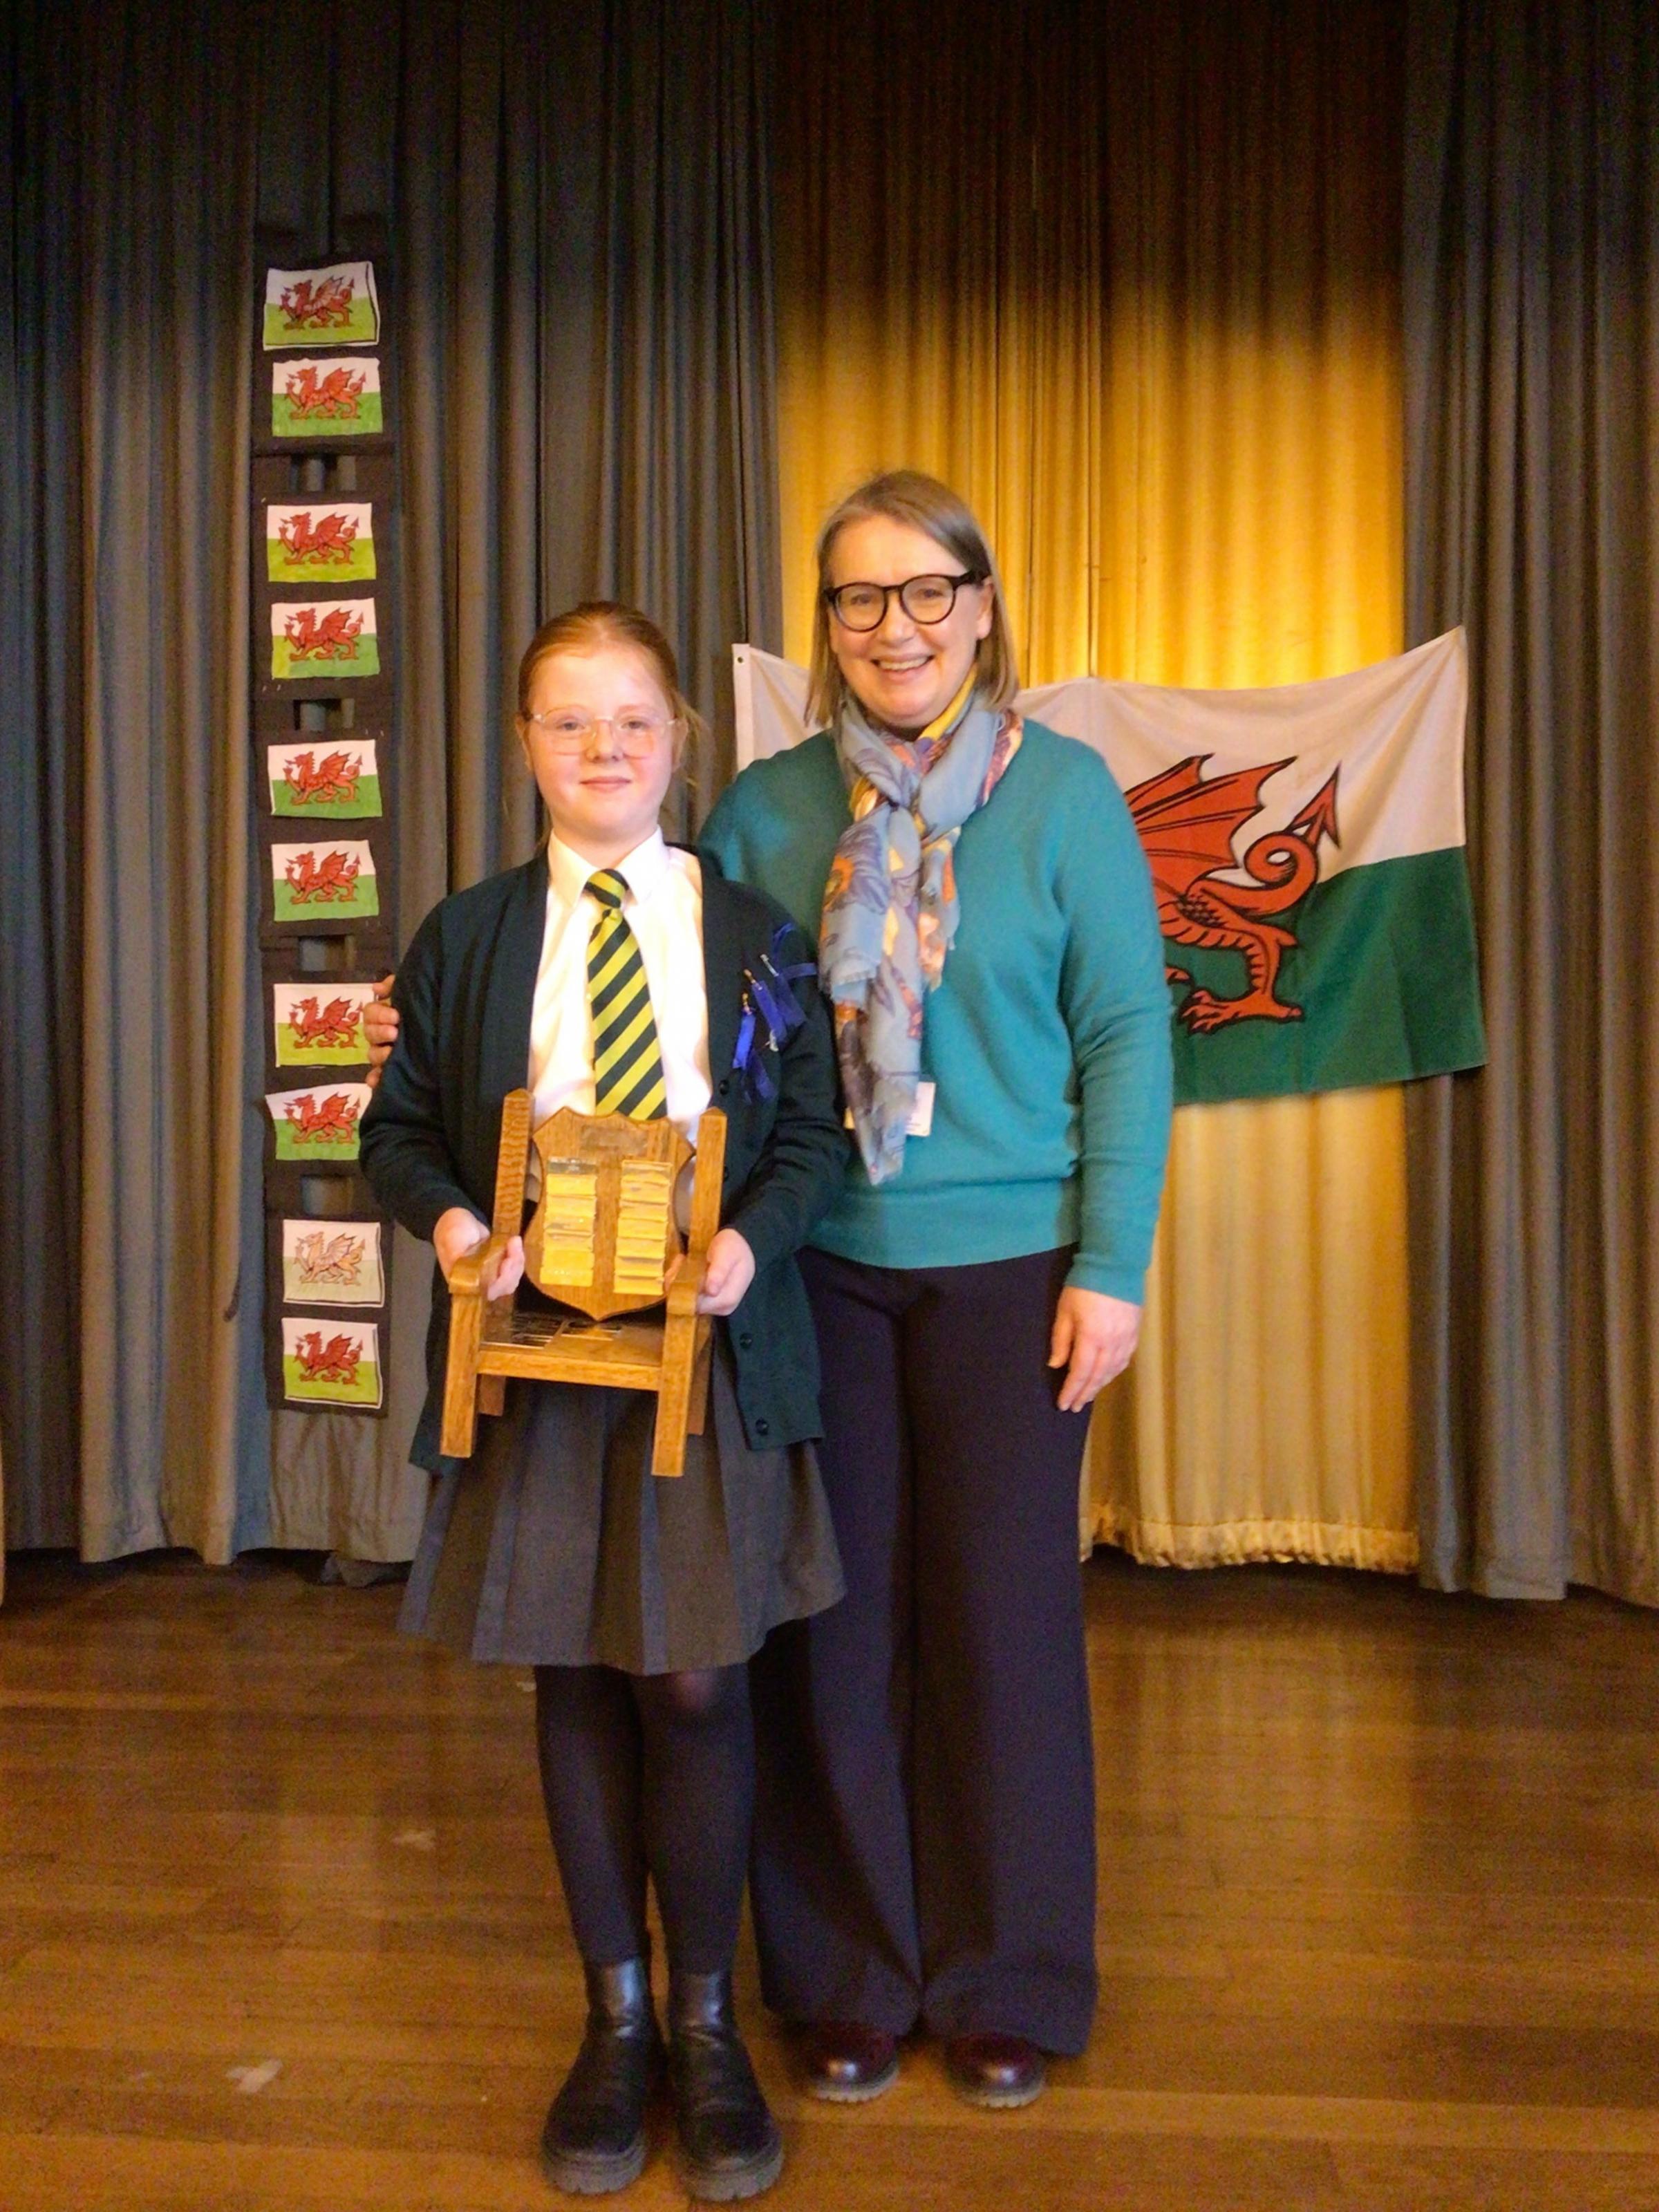 Maisie Jones, Year 6, who entered and won the most competitions, was presented the Eisteddfod Chair by Jo Grundy.